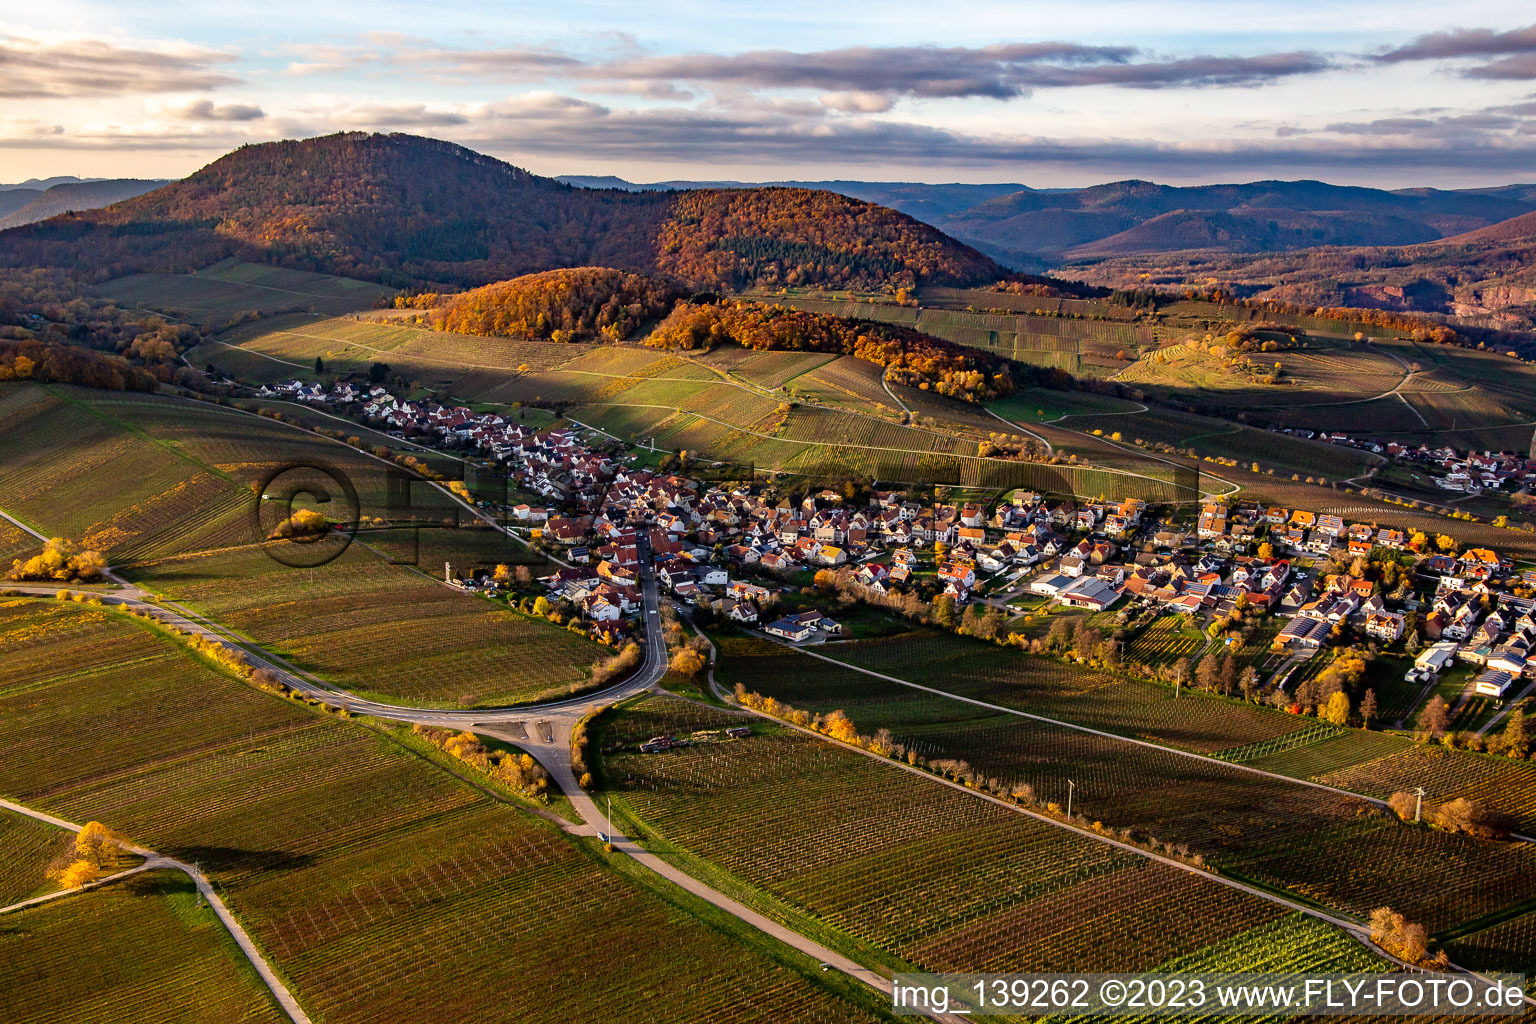 From the southeast in the district Arzheim in Landau in der Pfalz in the state Rhineland-Palatinate, Germany